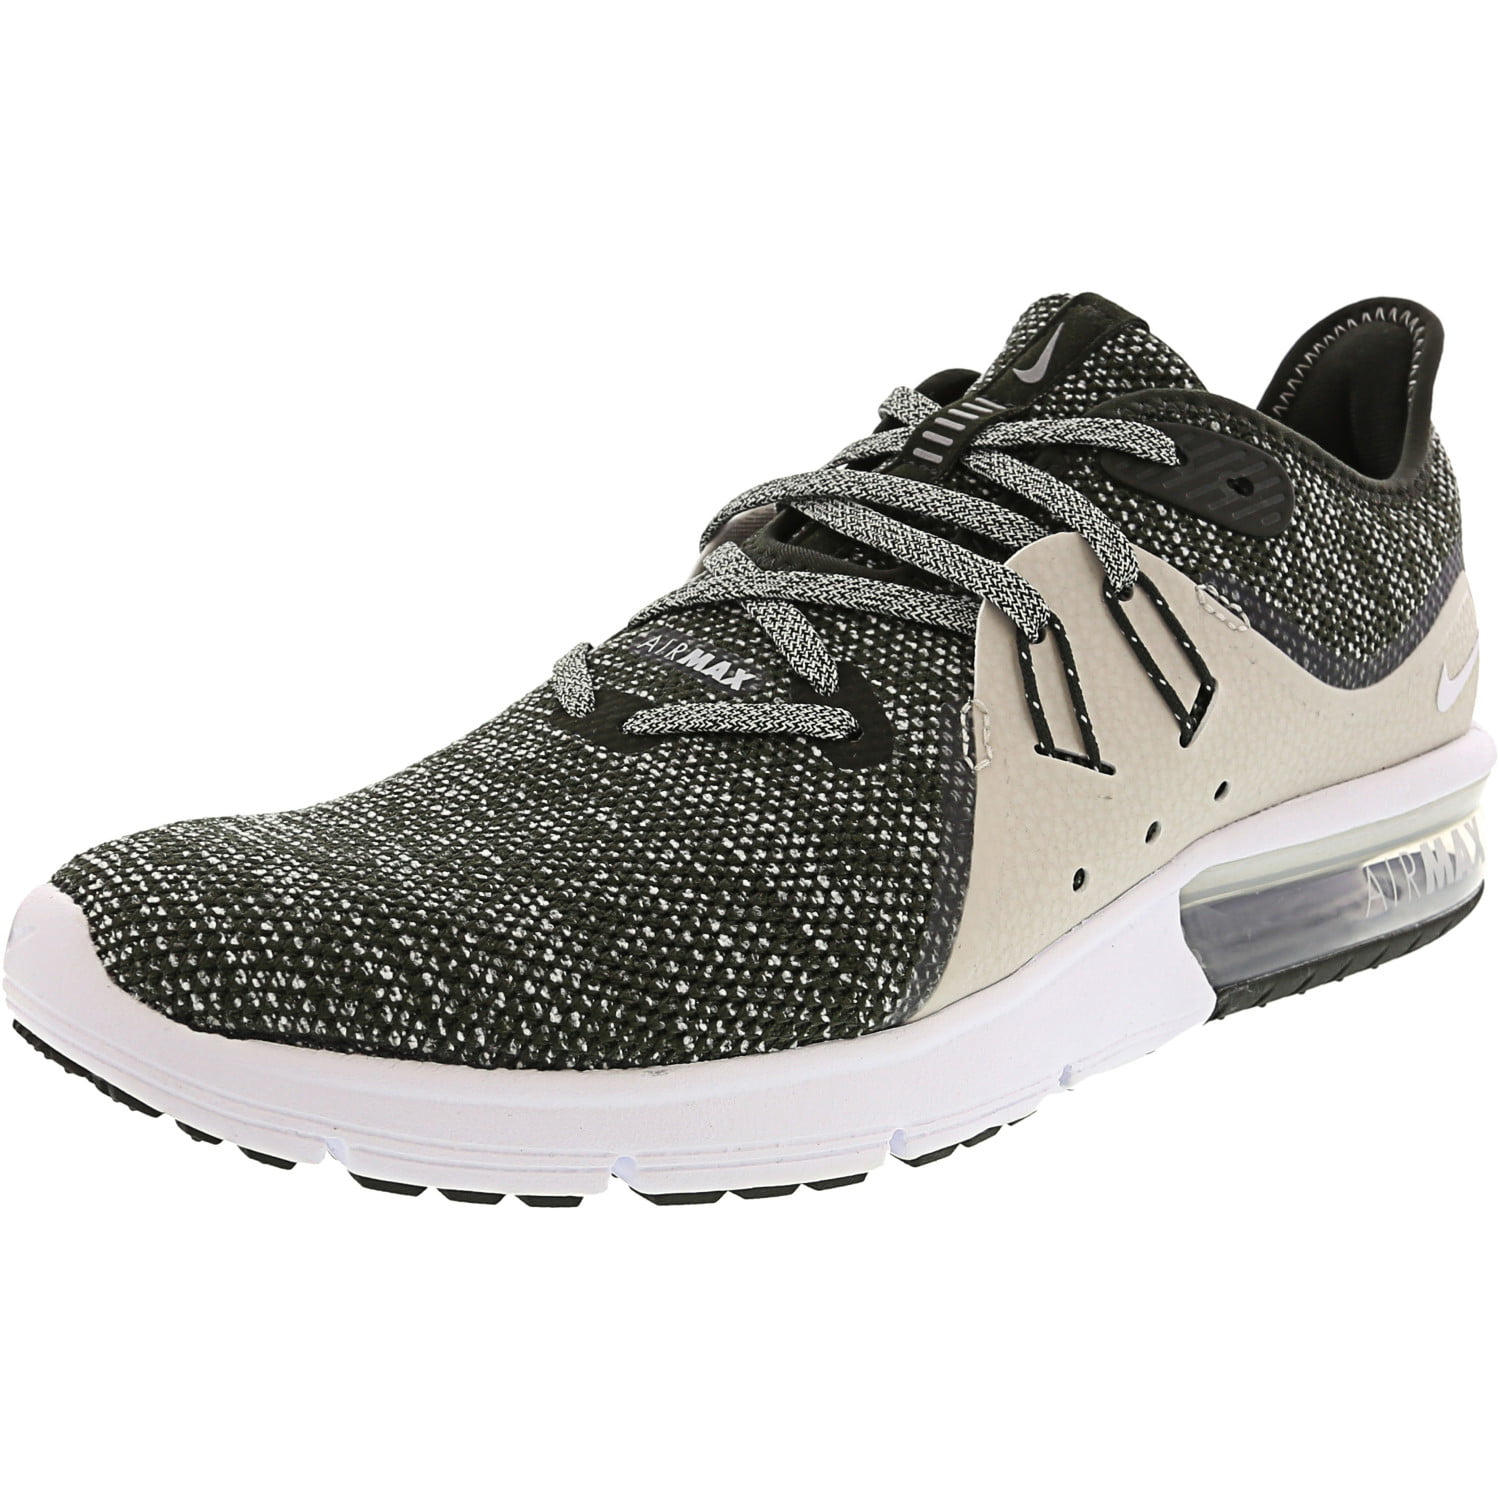 men's nike air max sequent 3 casual shoes